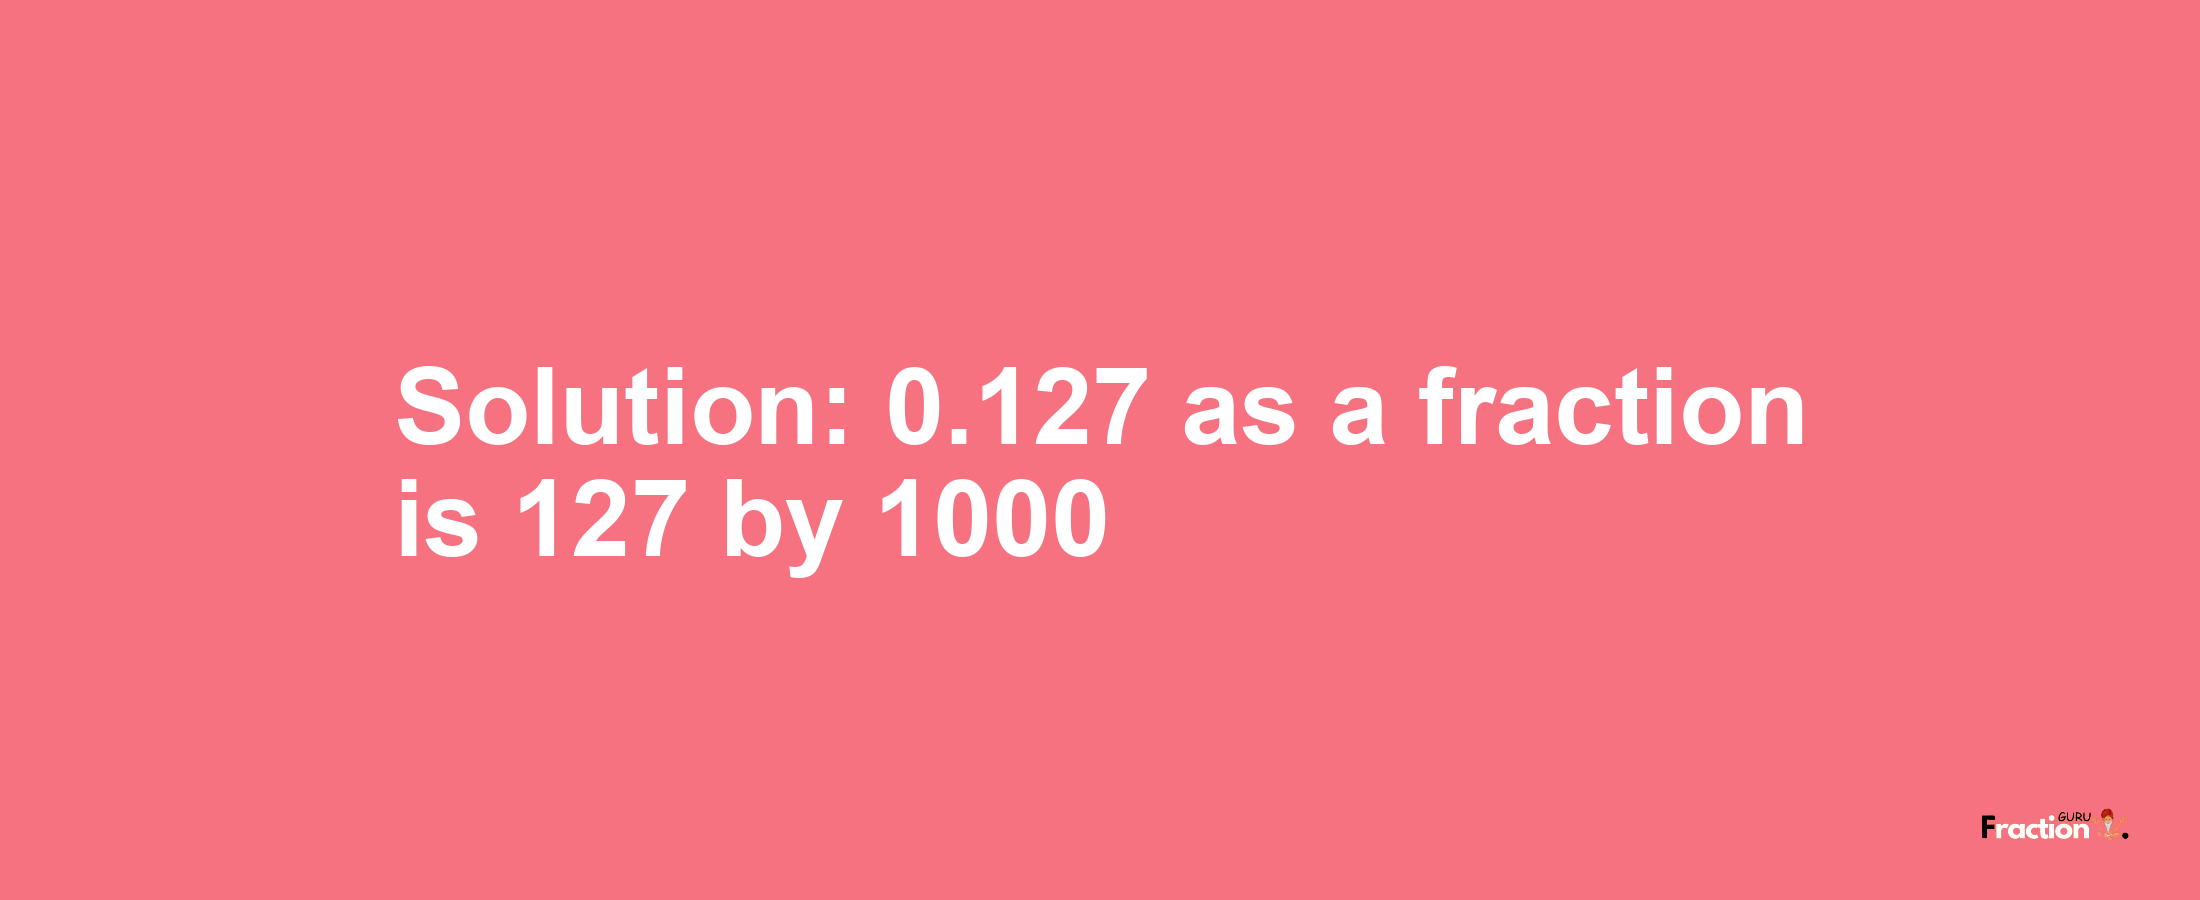 Solution:0.127 as a fraction is 127/1000